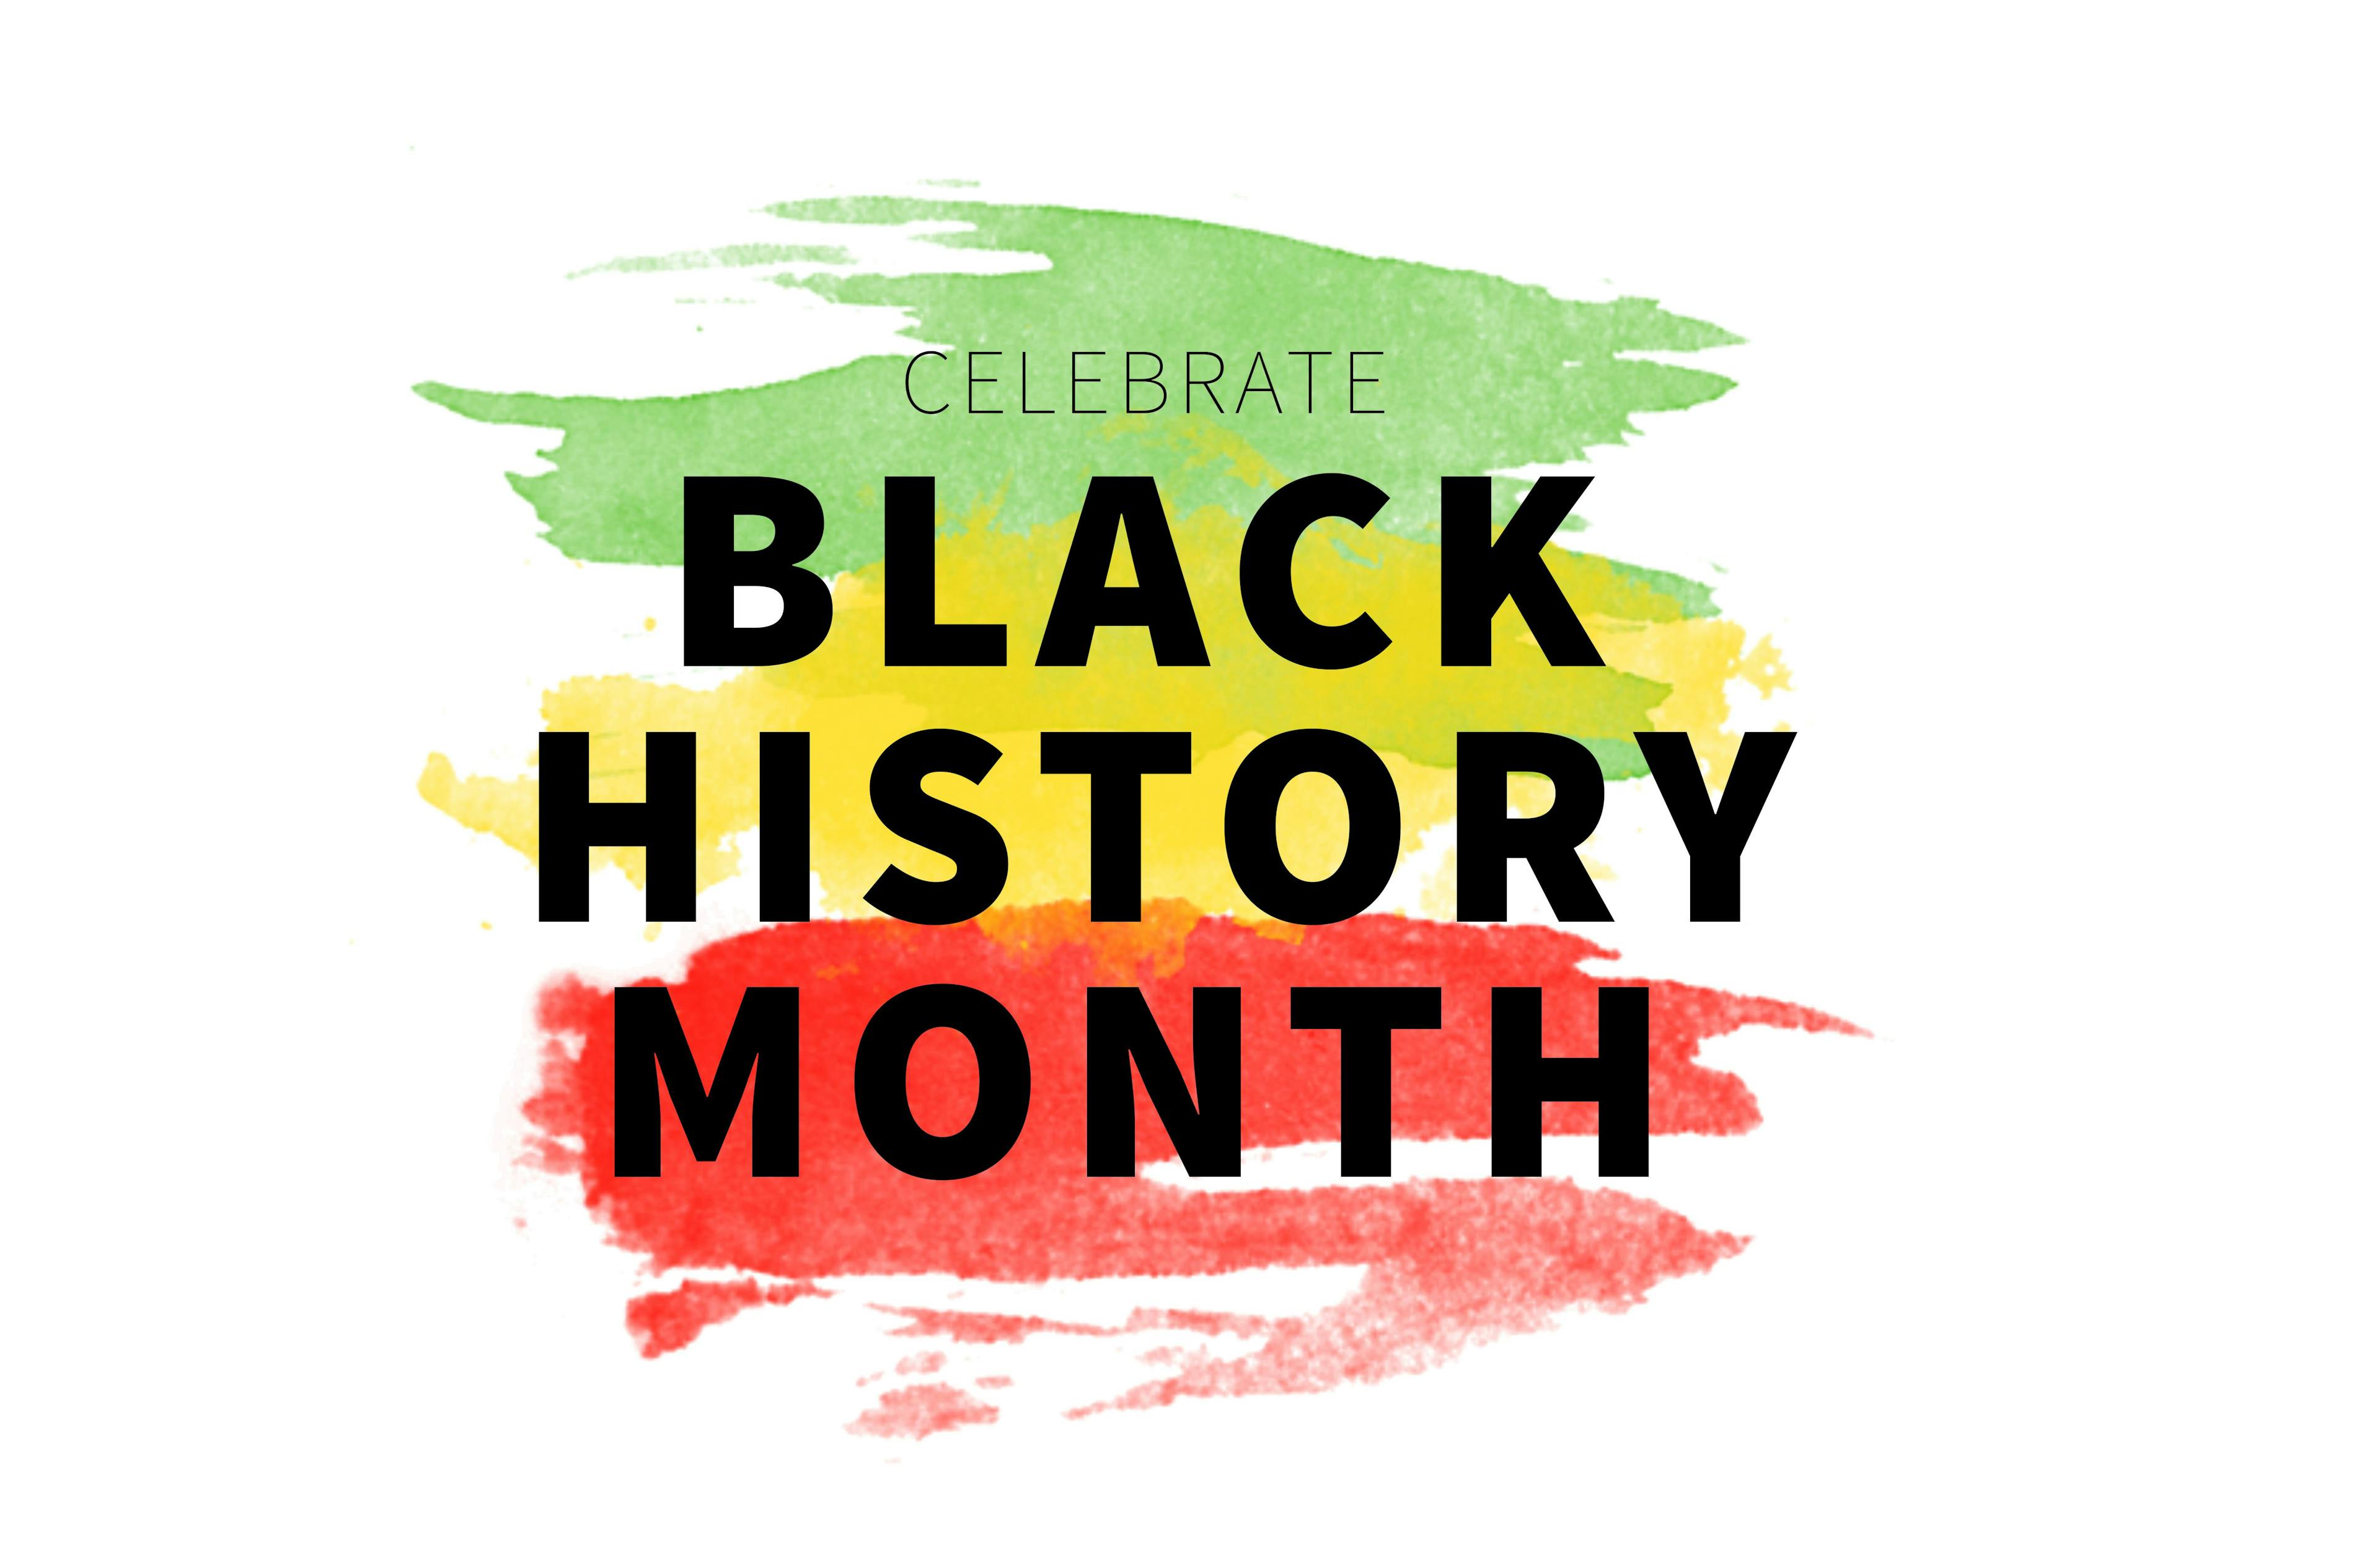 Celebrating Black History Month: 4 influential figures you should know